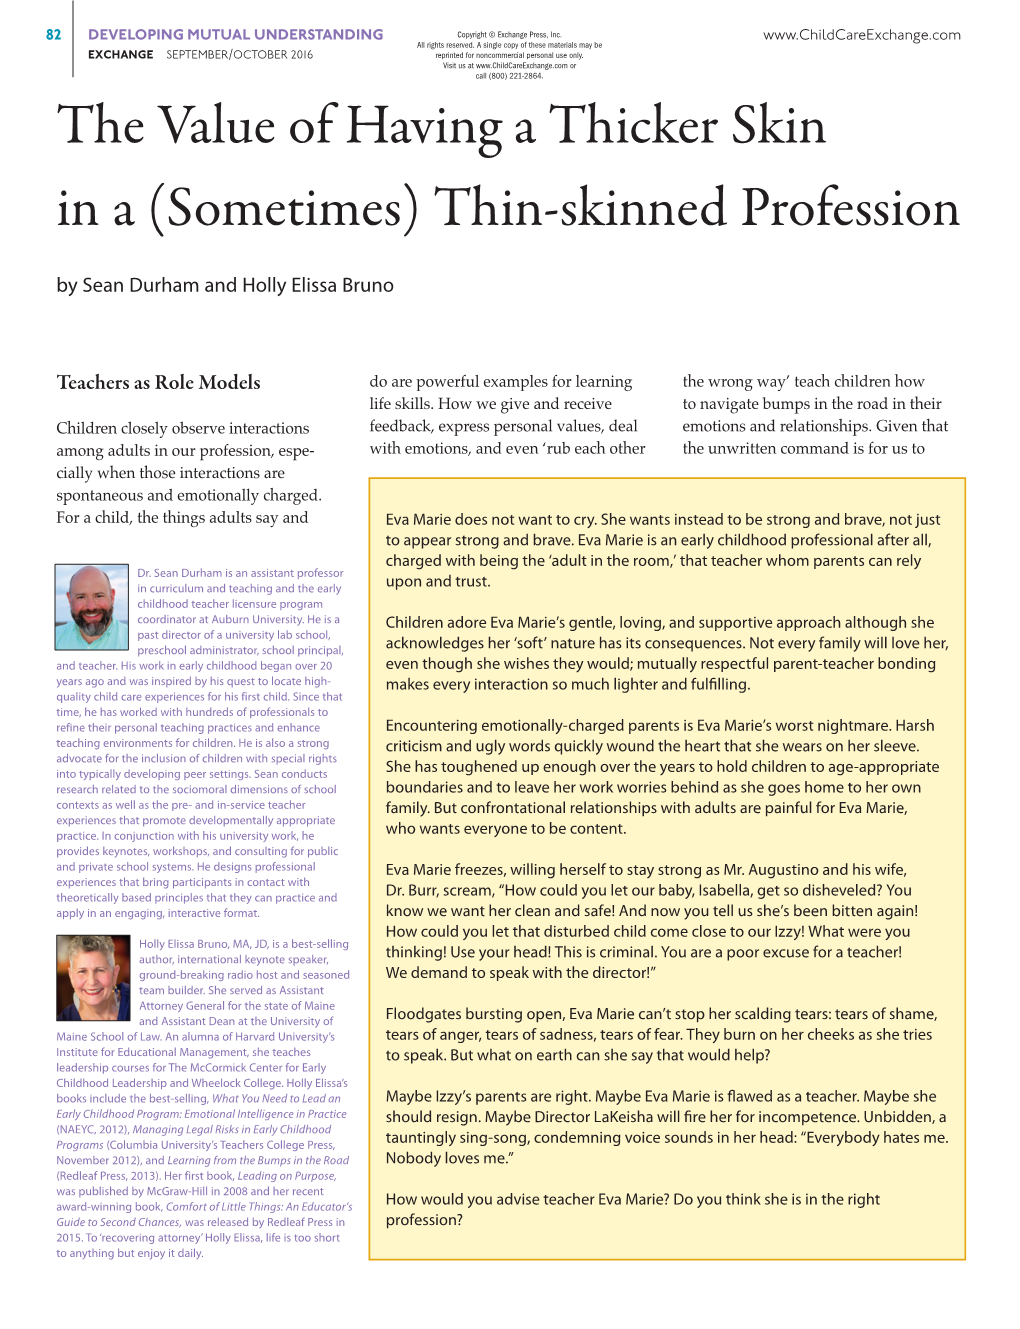 The Value of Having a Thicker Skin in a (Sometimes) Thin-Skinned Profession